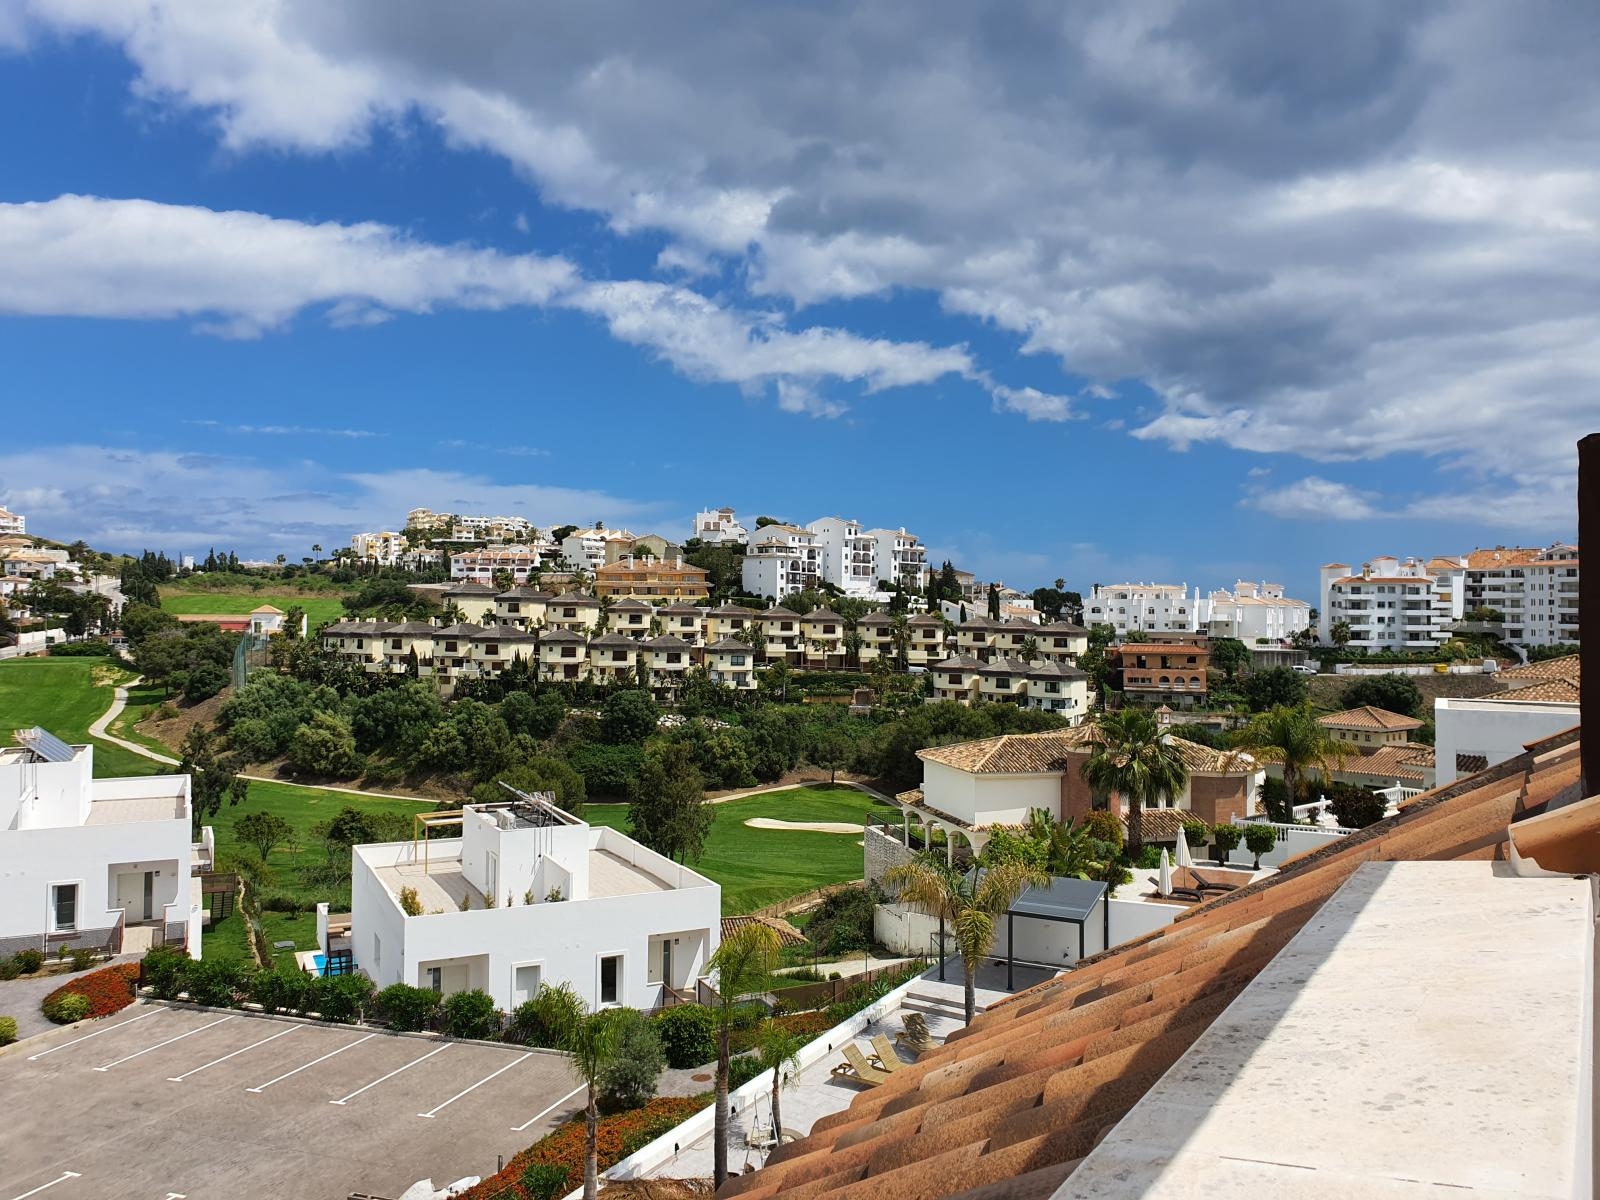 Close to shops, bars and beach.  This particular house has 254m constructed and 191 m of private garden, 67m of terrace and its own private swimming pool